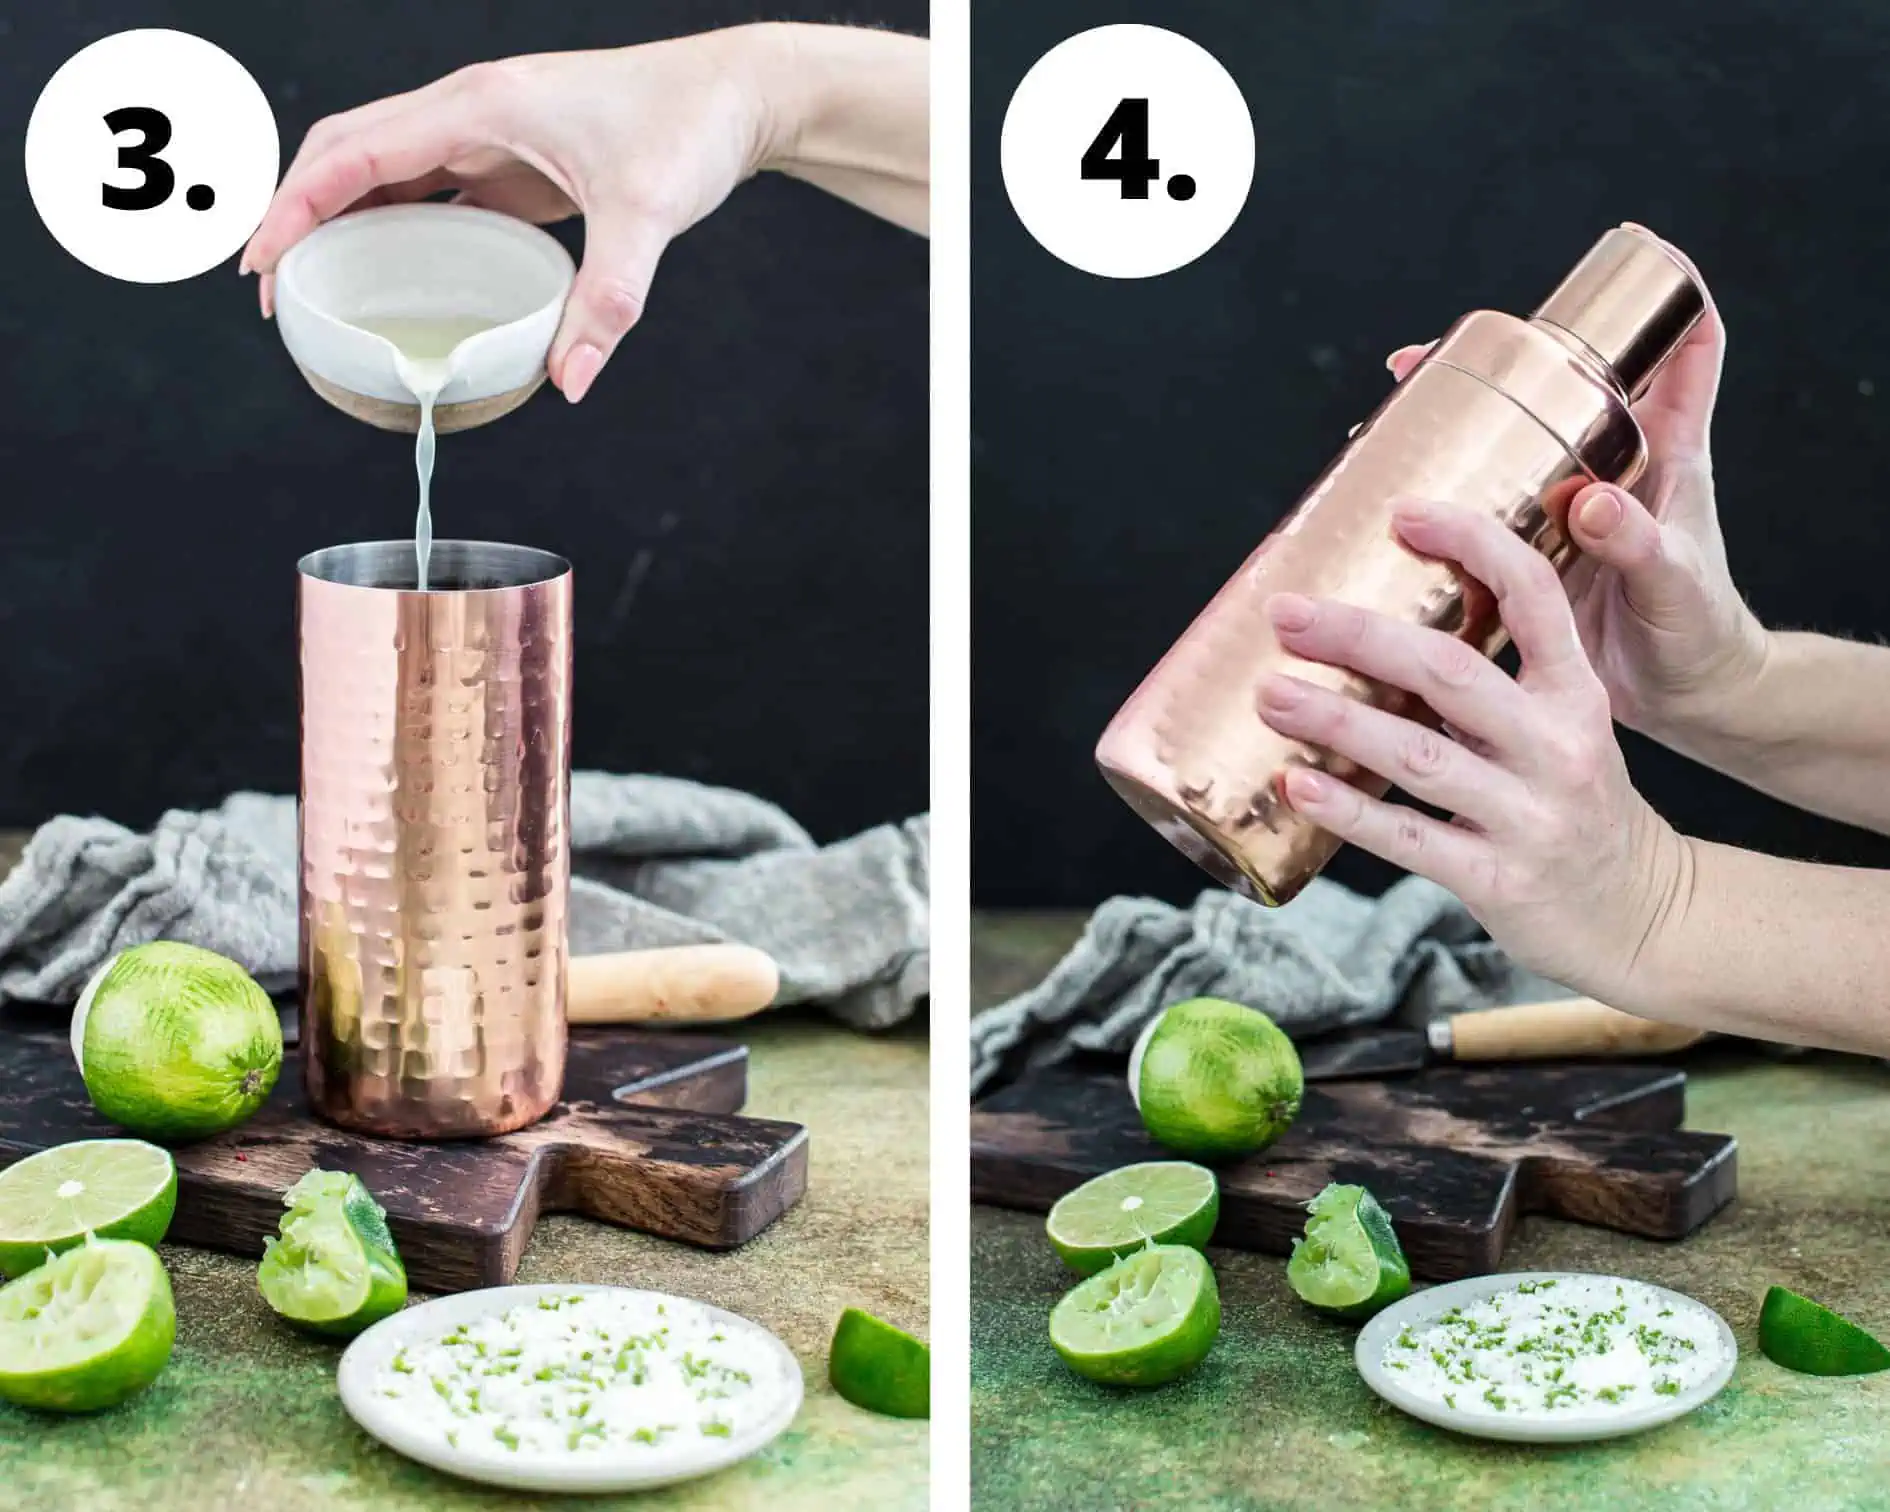 How to make a margarita with vodka steps 3 and 4.